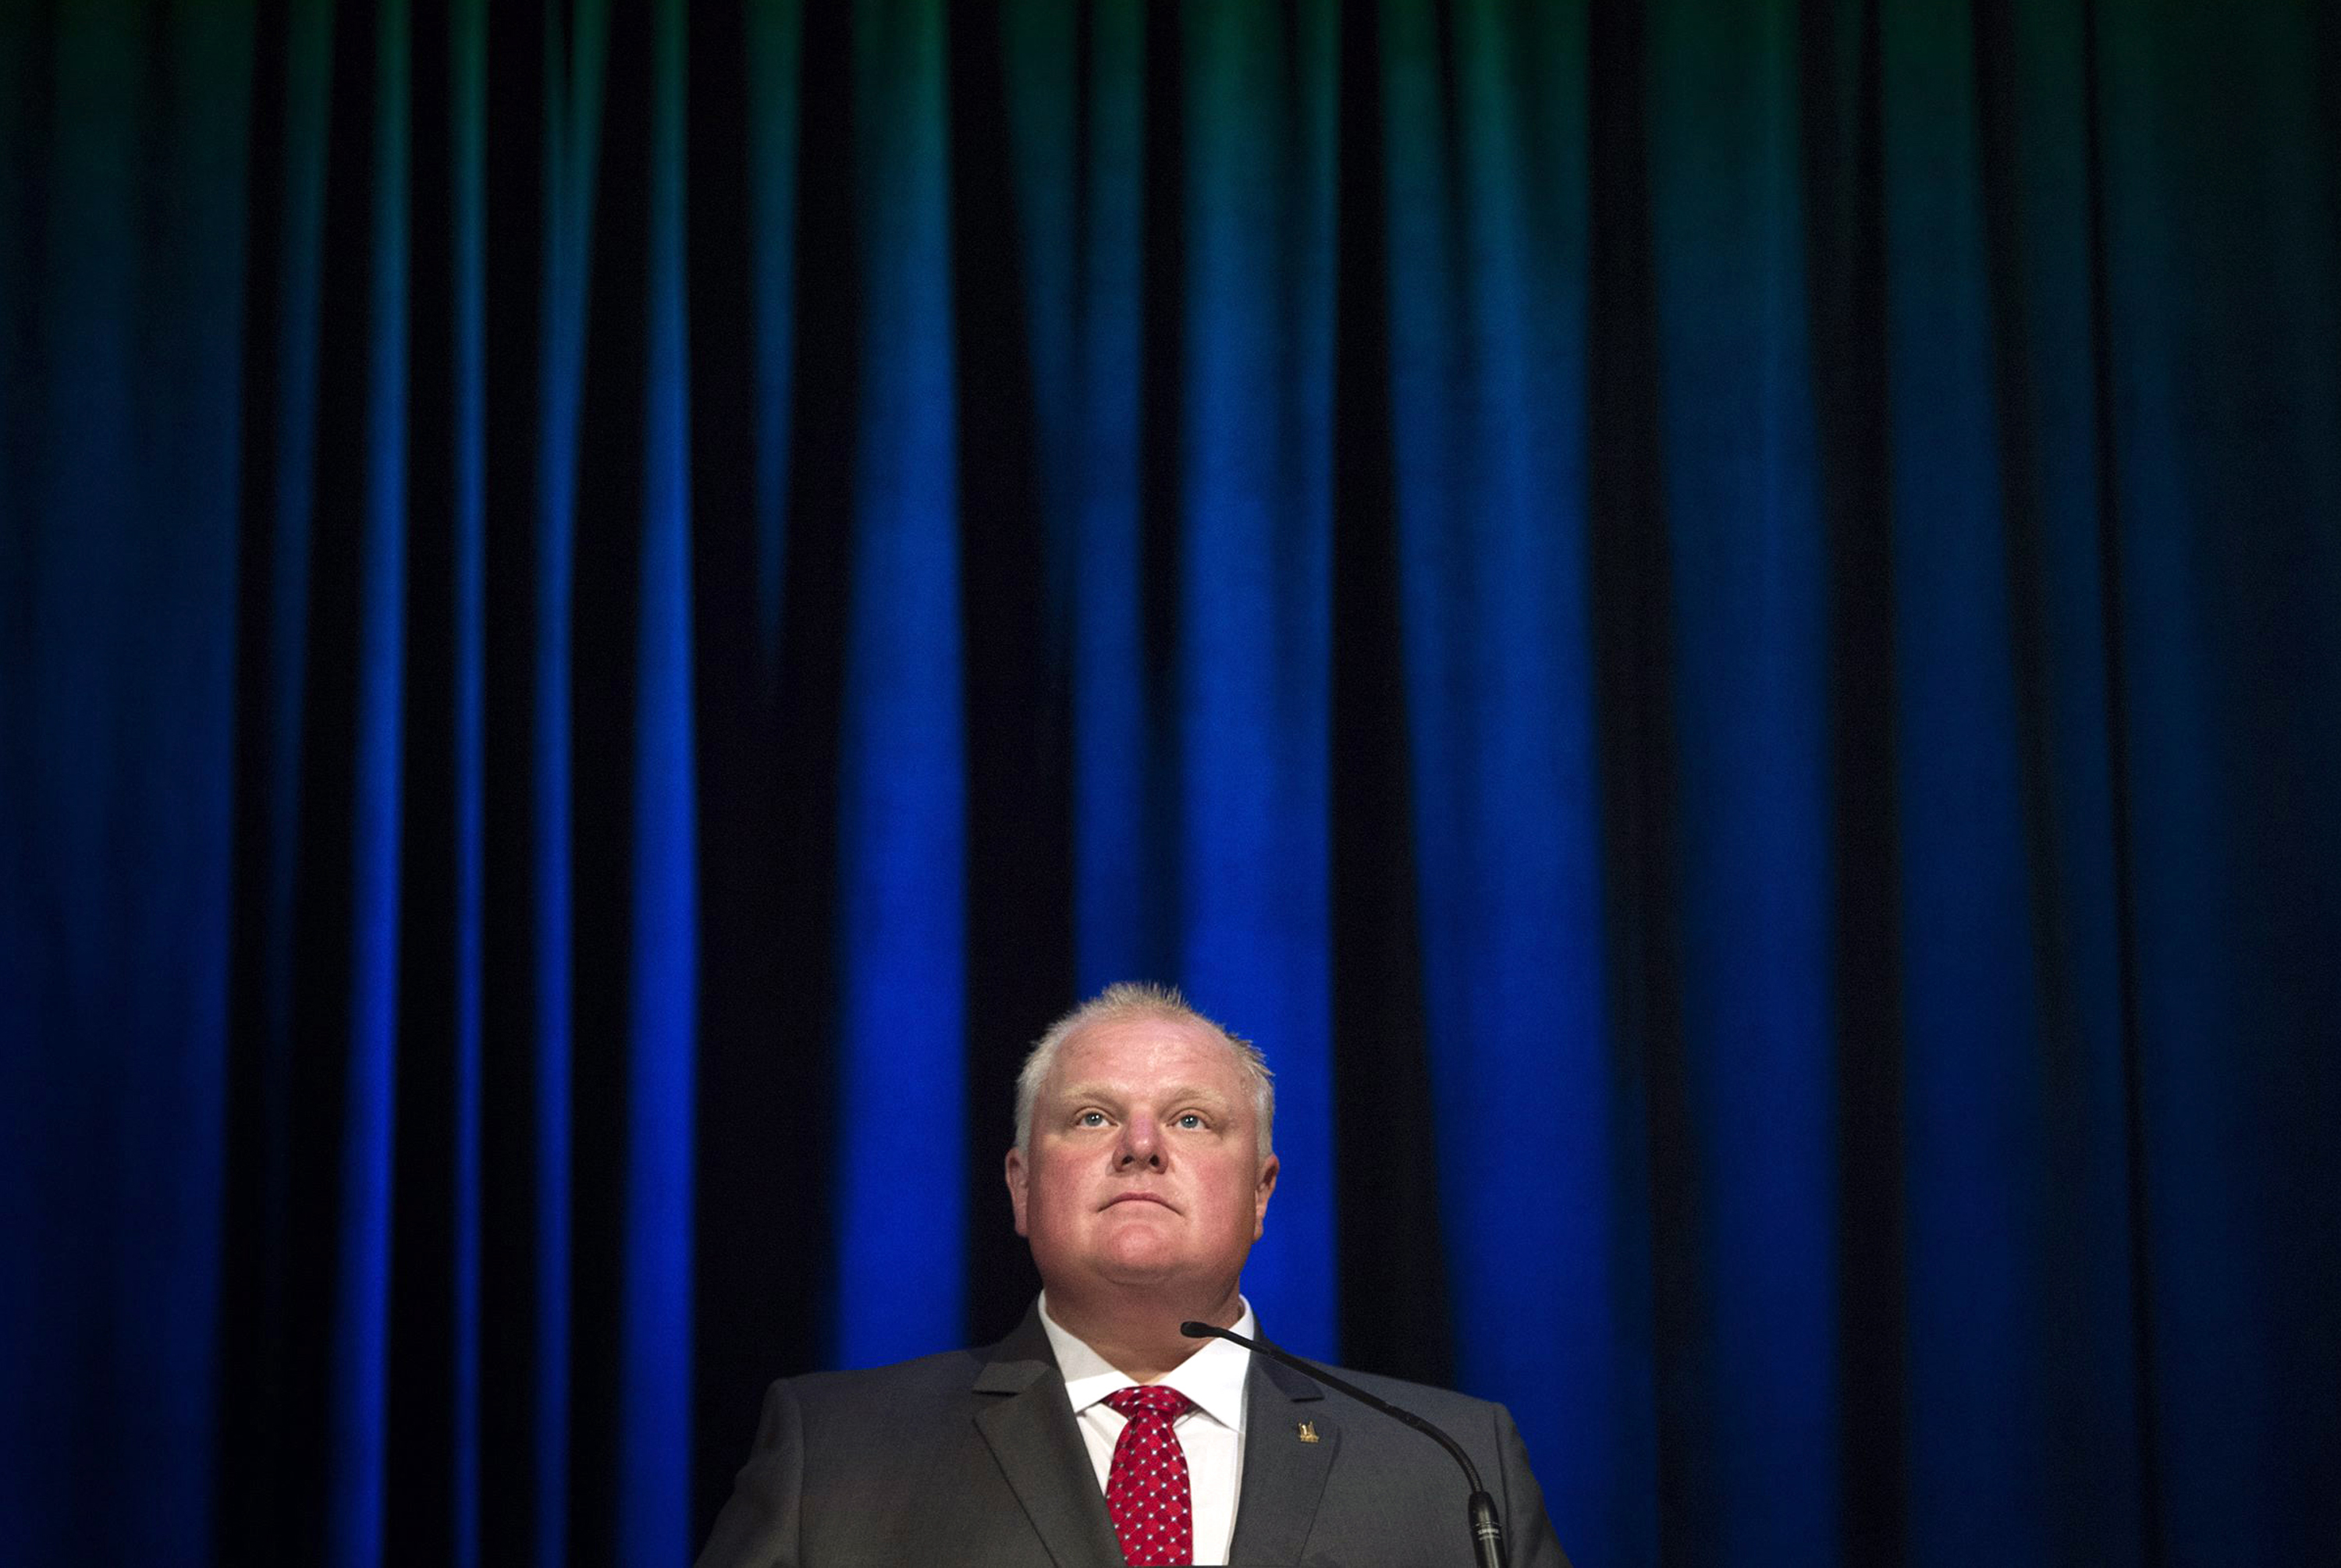 Toronto Mayor Rob Ford pauses while participating in a mayoral debate in Toronto on July 15, 2014.